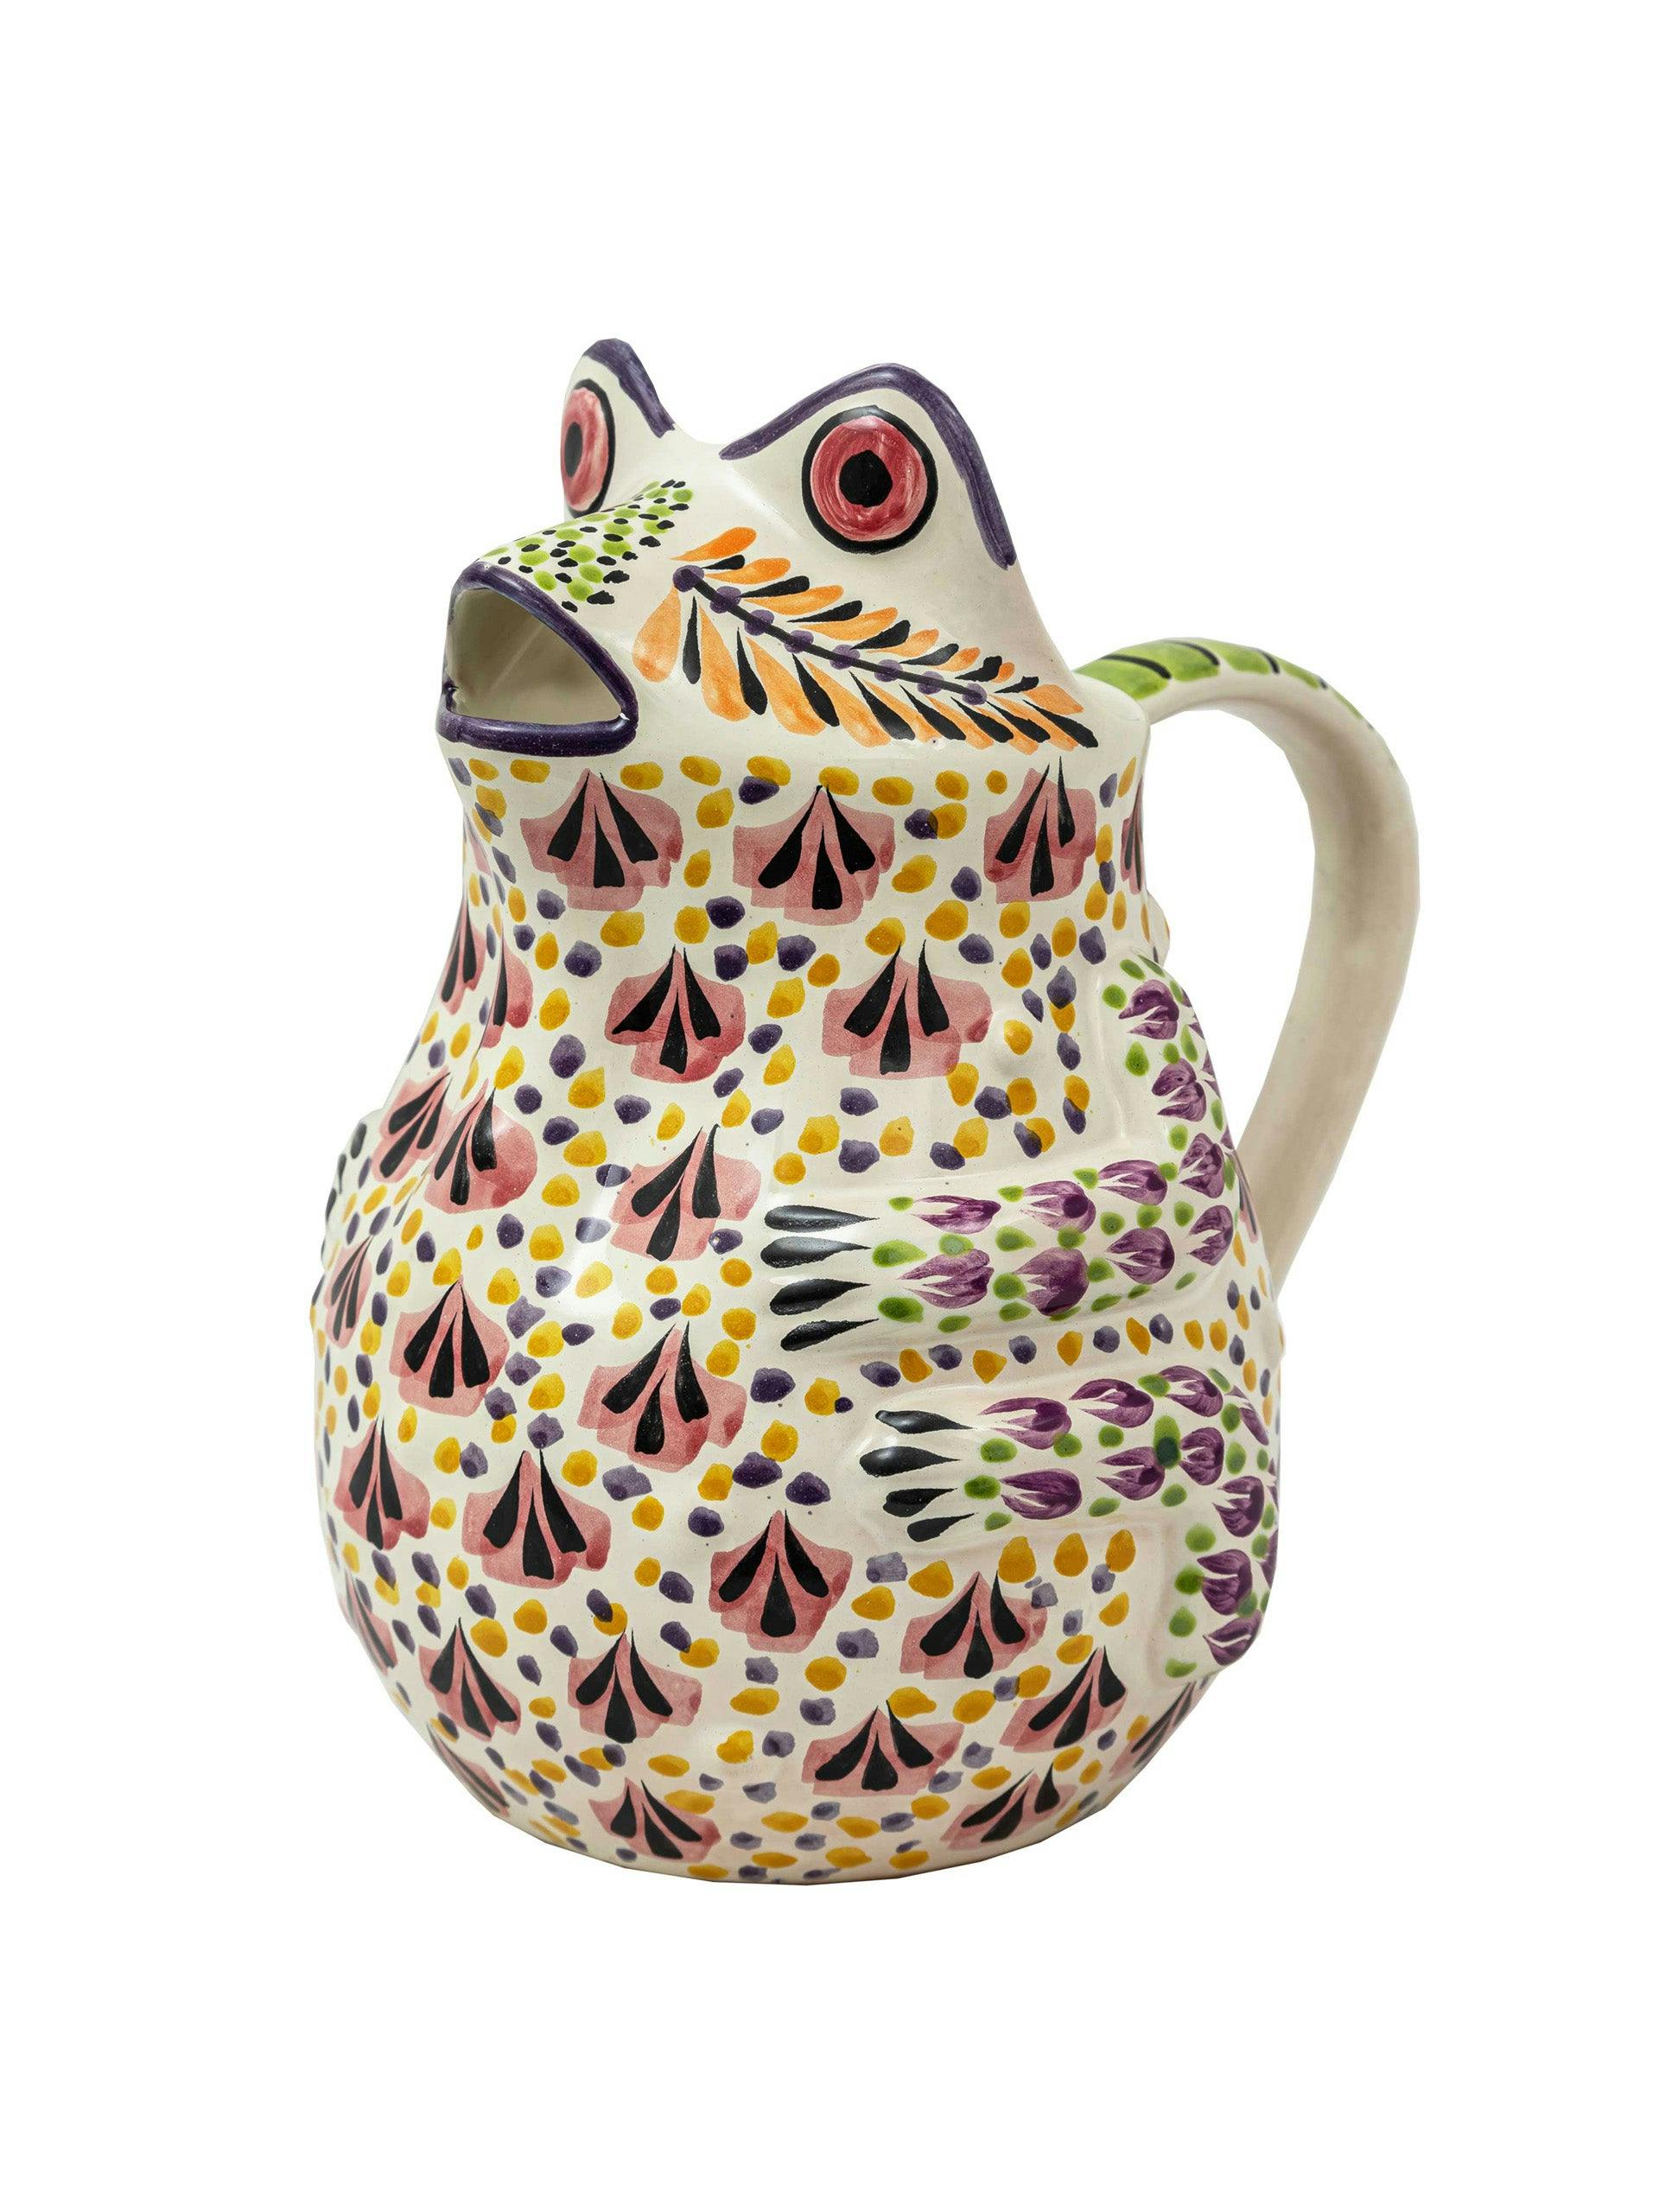 Frog water pitcher in purple and orange